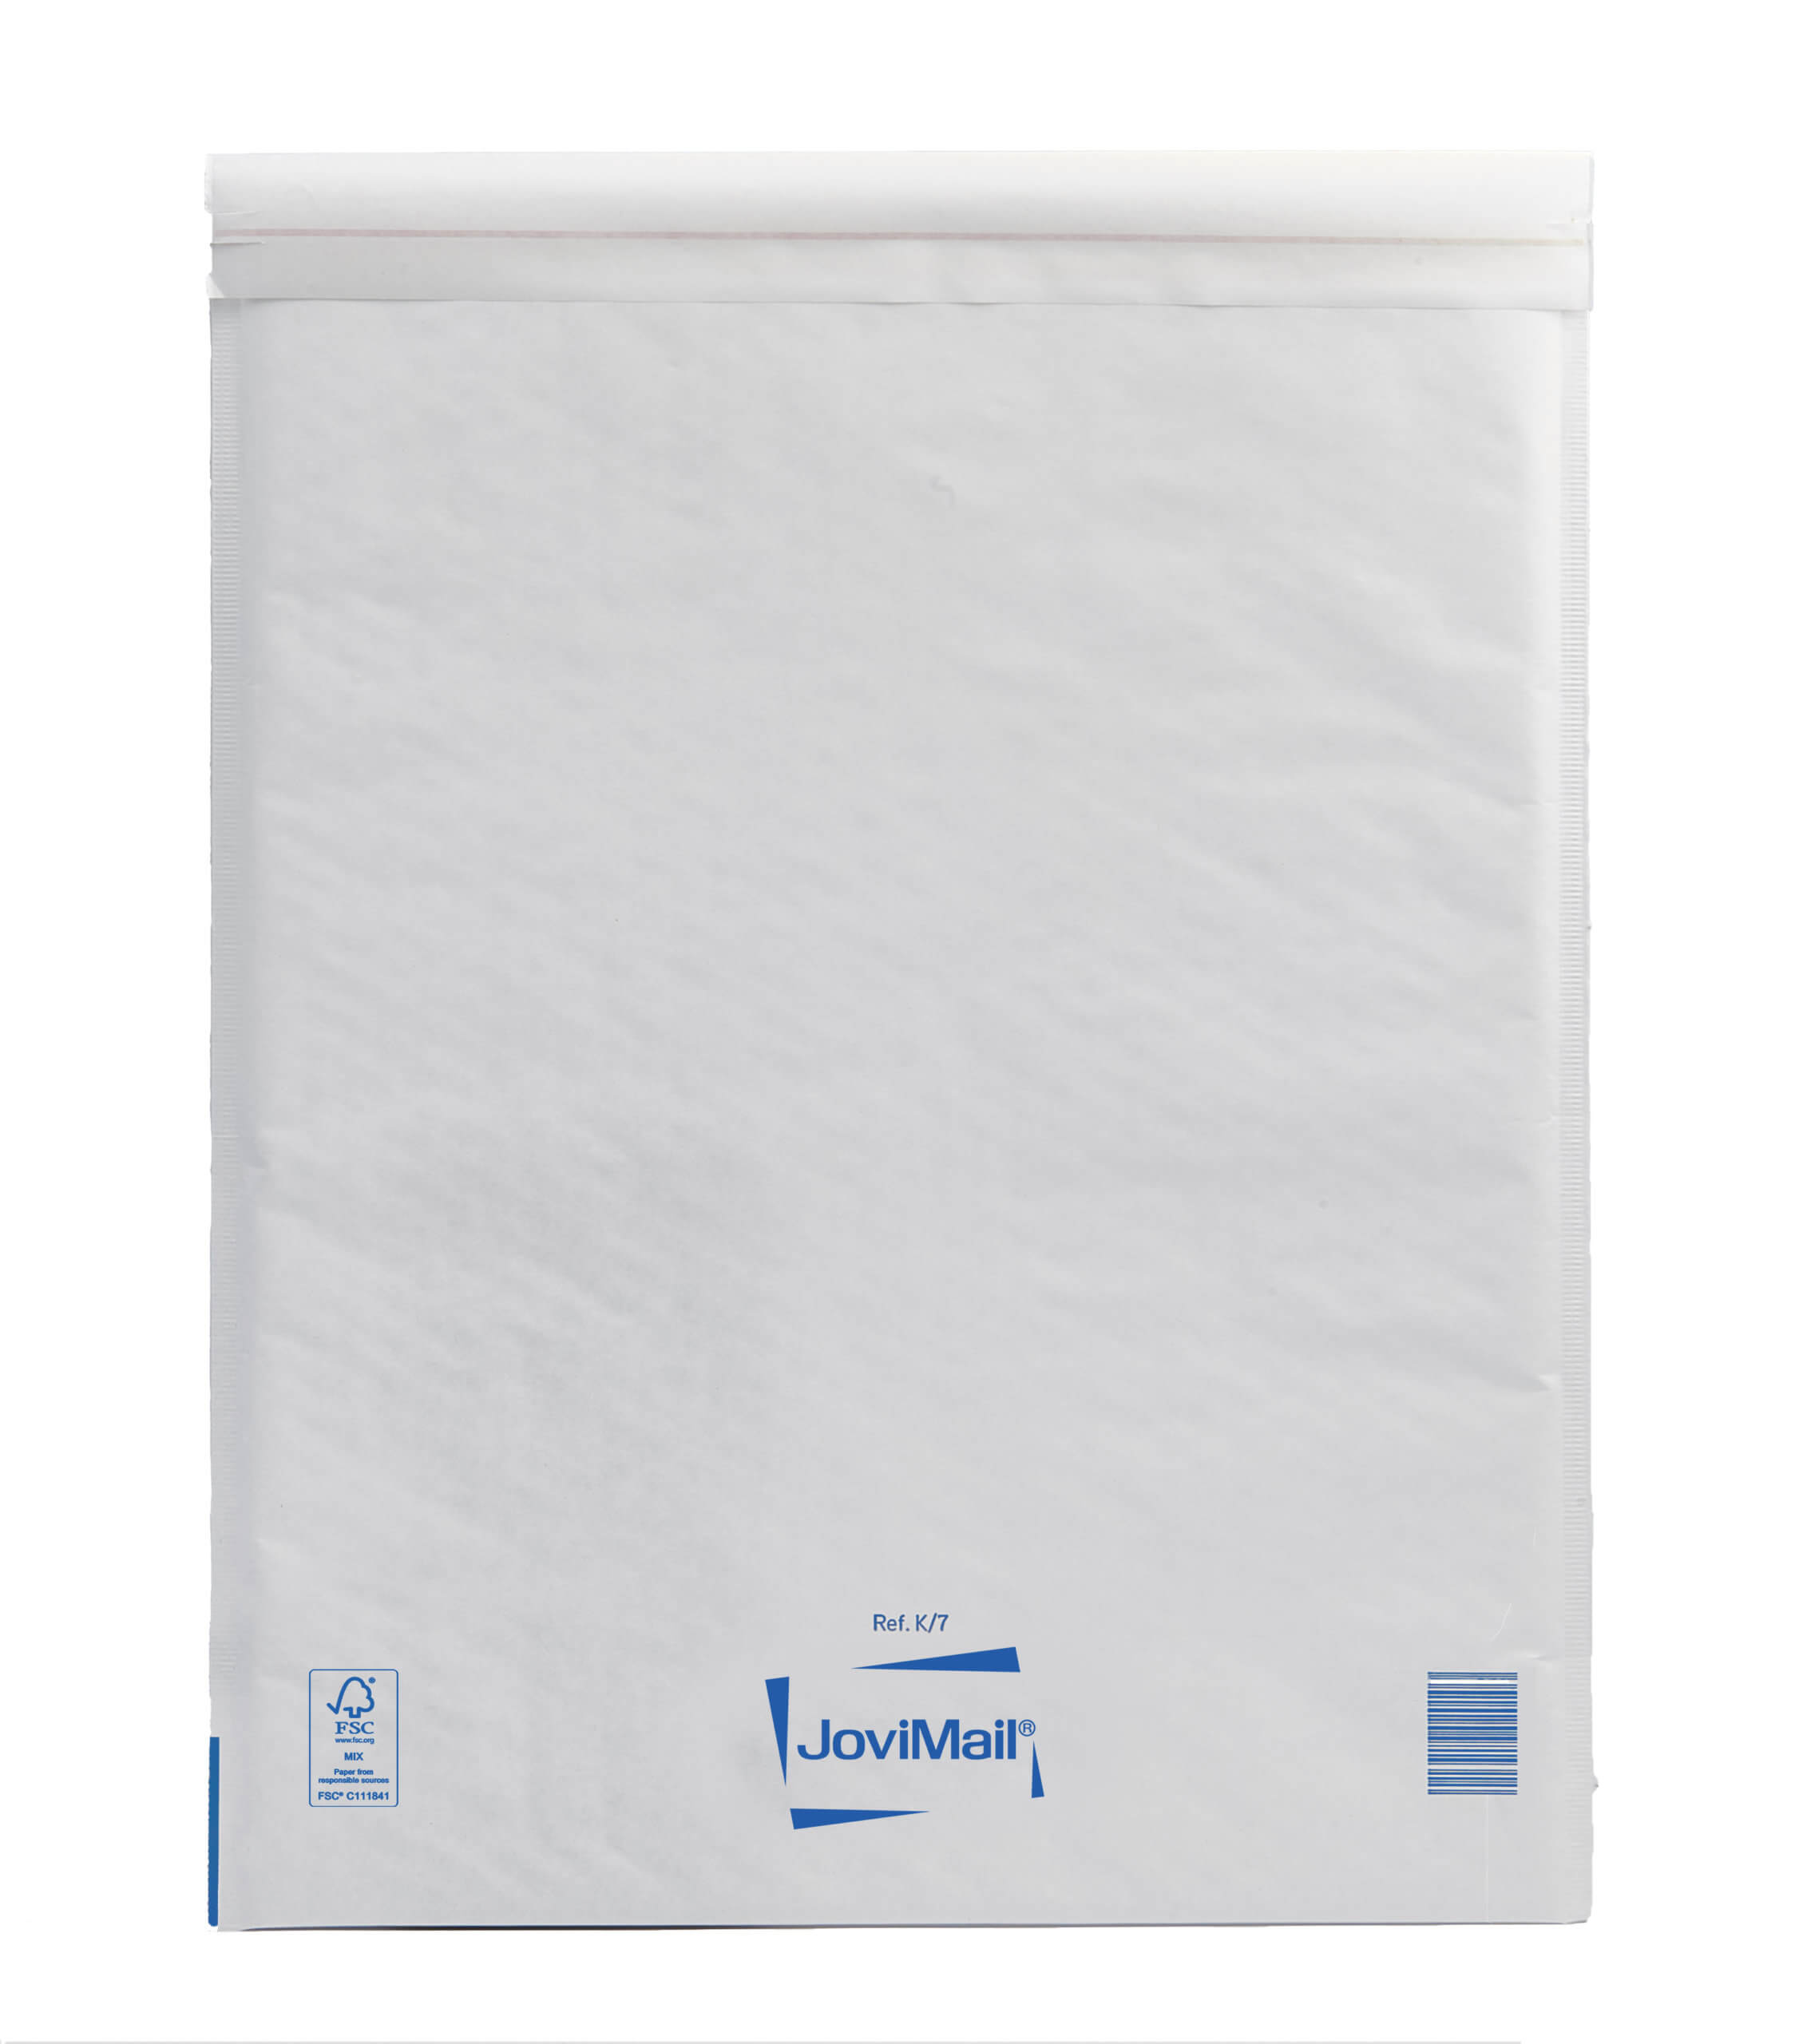 Enveloppe bulle Mail Lite JoviMail® blanche taille K/7 - 350x470